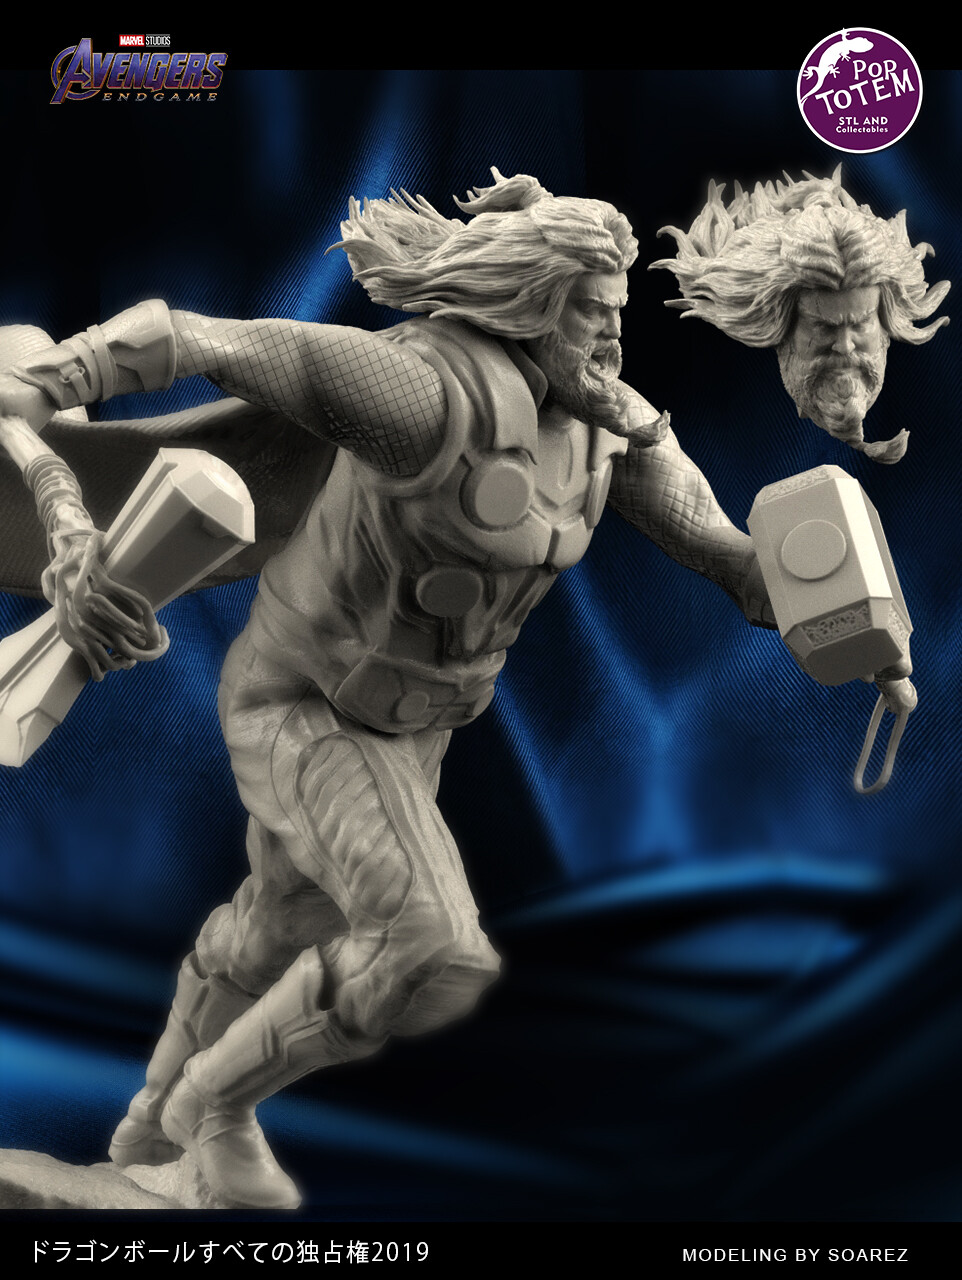 Games - Thor The Video Game 3, GAMES_3619. 3D stl model for CNC